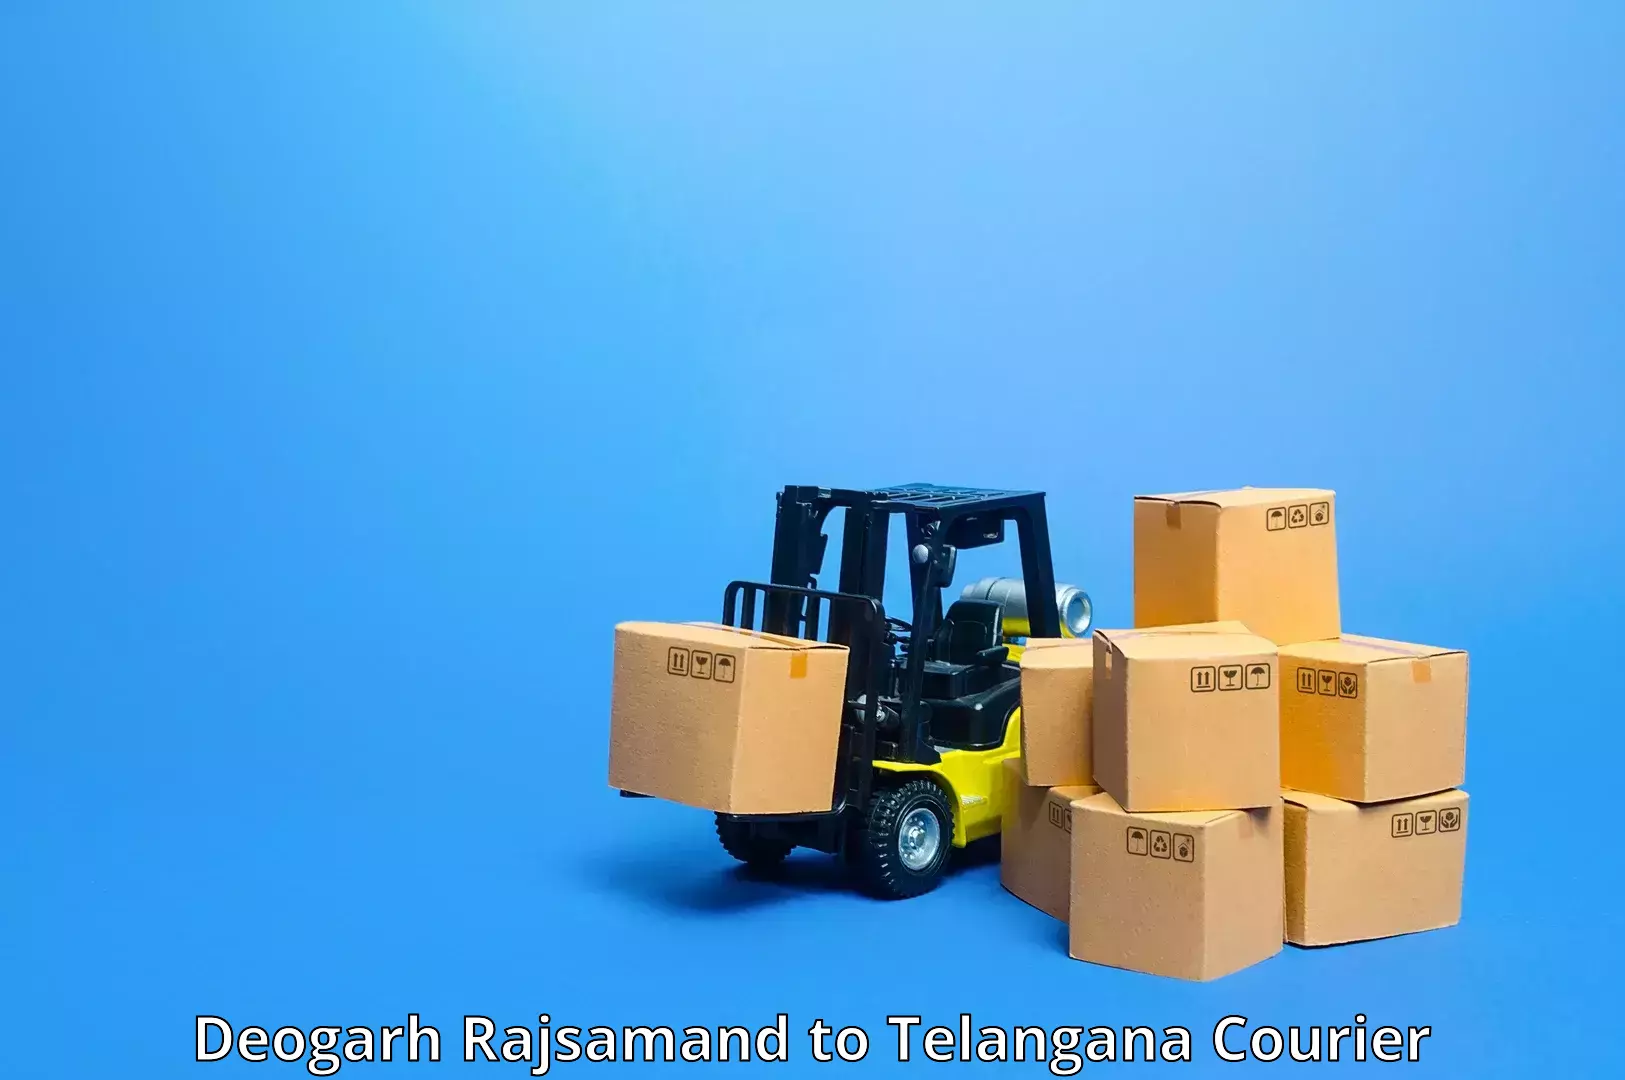 State-of-the-art courier technology in Deogarh Rajsamand to Amangal